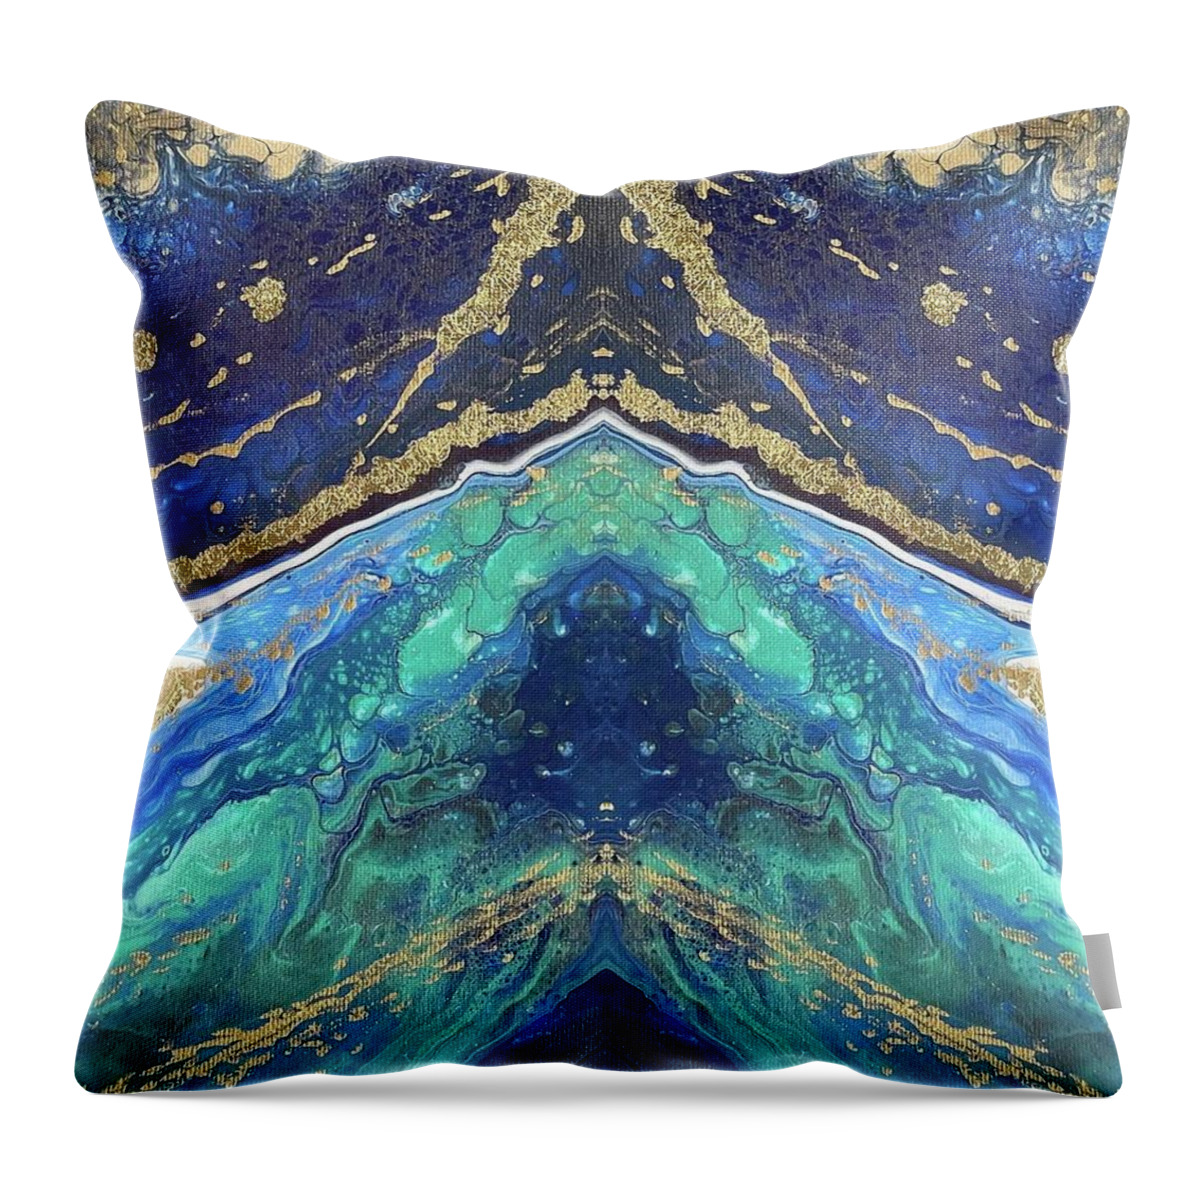 Digital Throw Pillow featuring the digital art Current by Nicole DiCicco